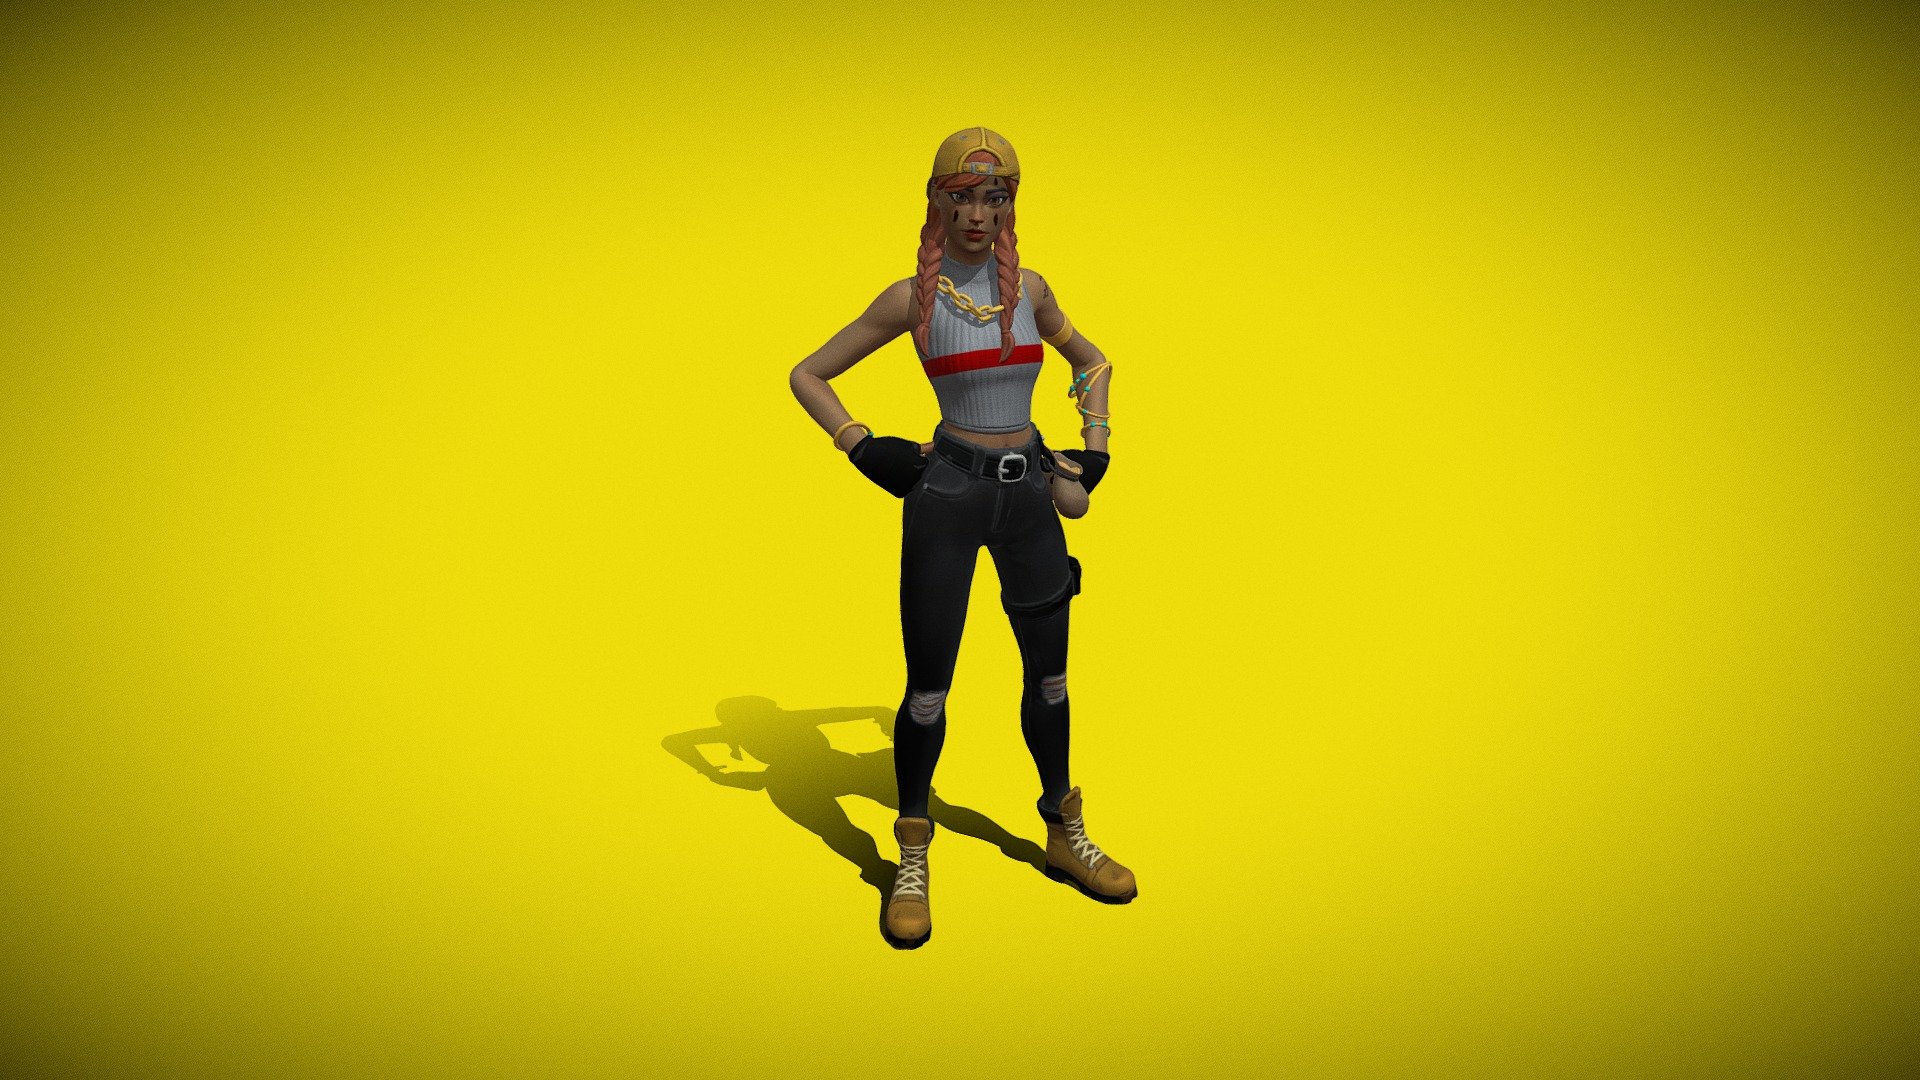 Fortnite Aura Download Free 3d Model By Astronatee Astronatee Ff5c5af